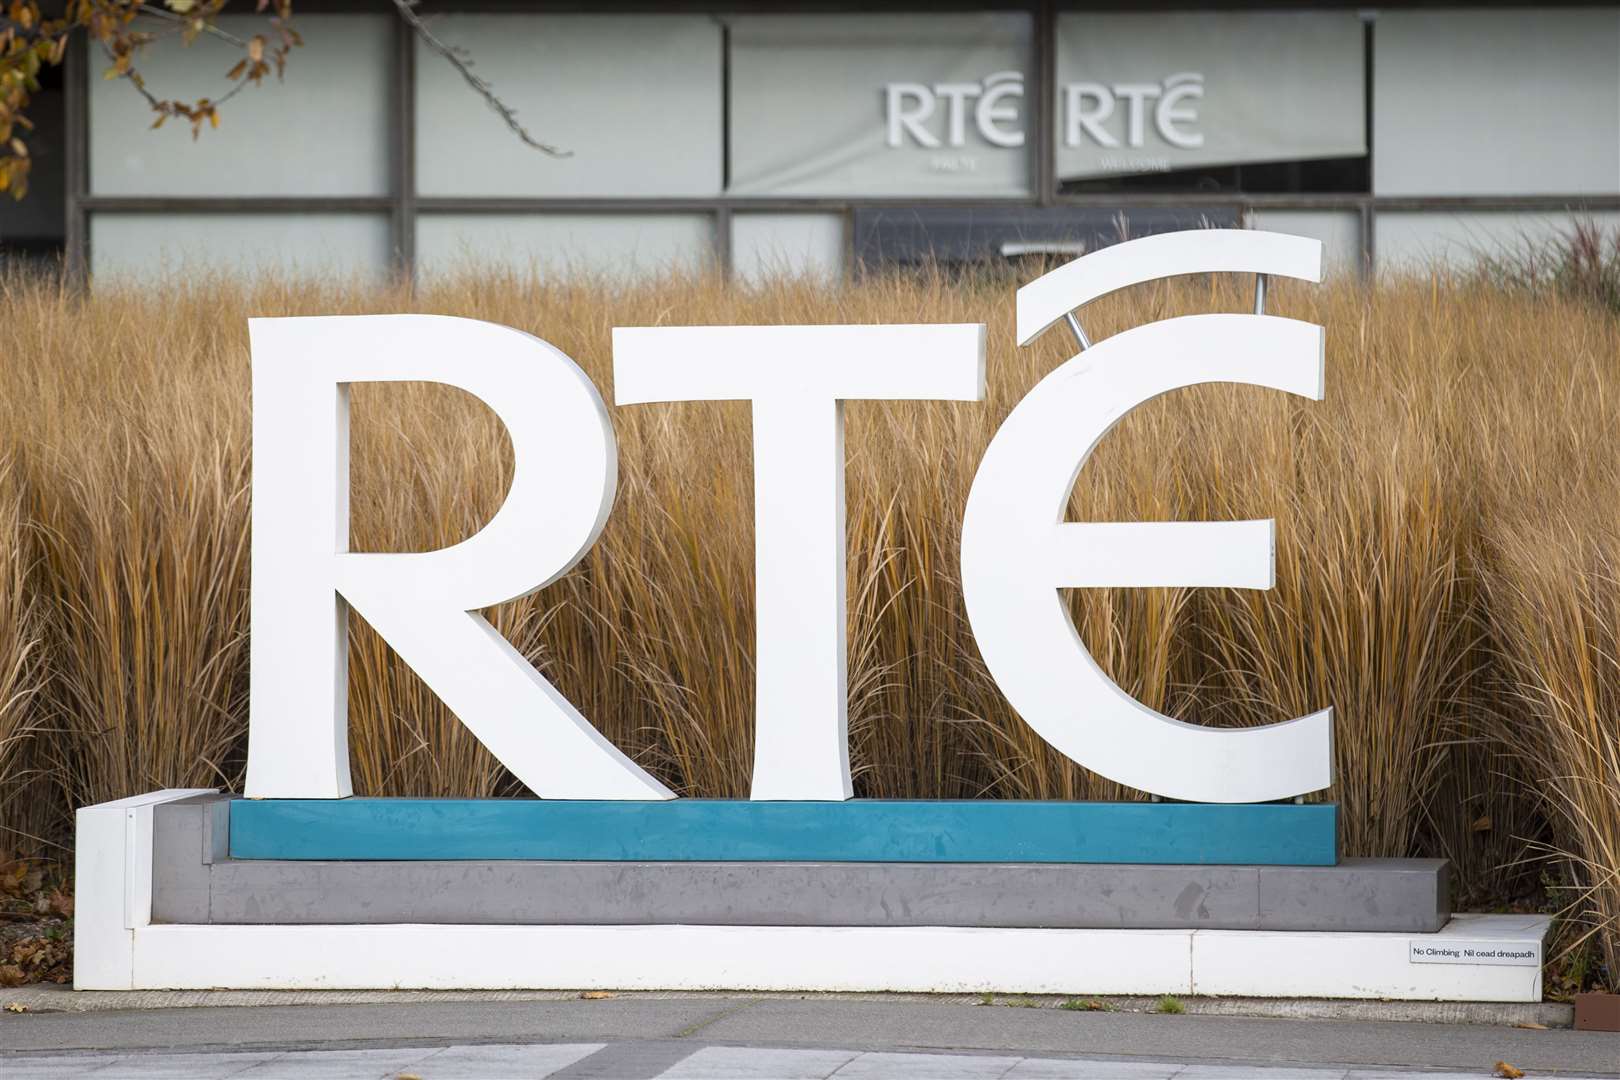 RTE recorded losses of more than two million euros on the Toy Show The Musical project (Liam McBurney/PA)